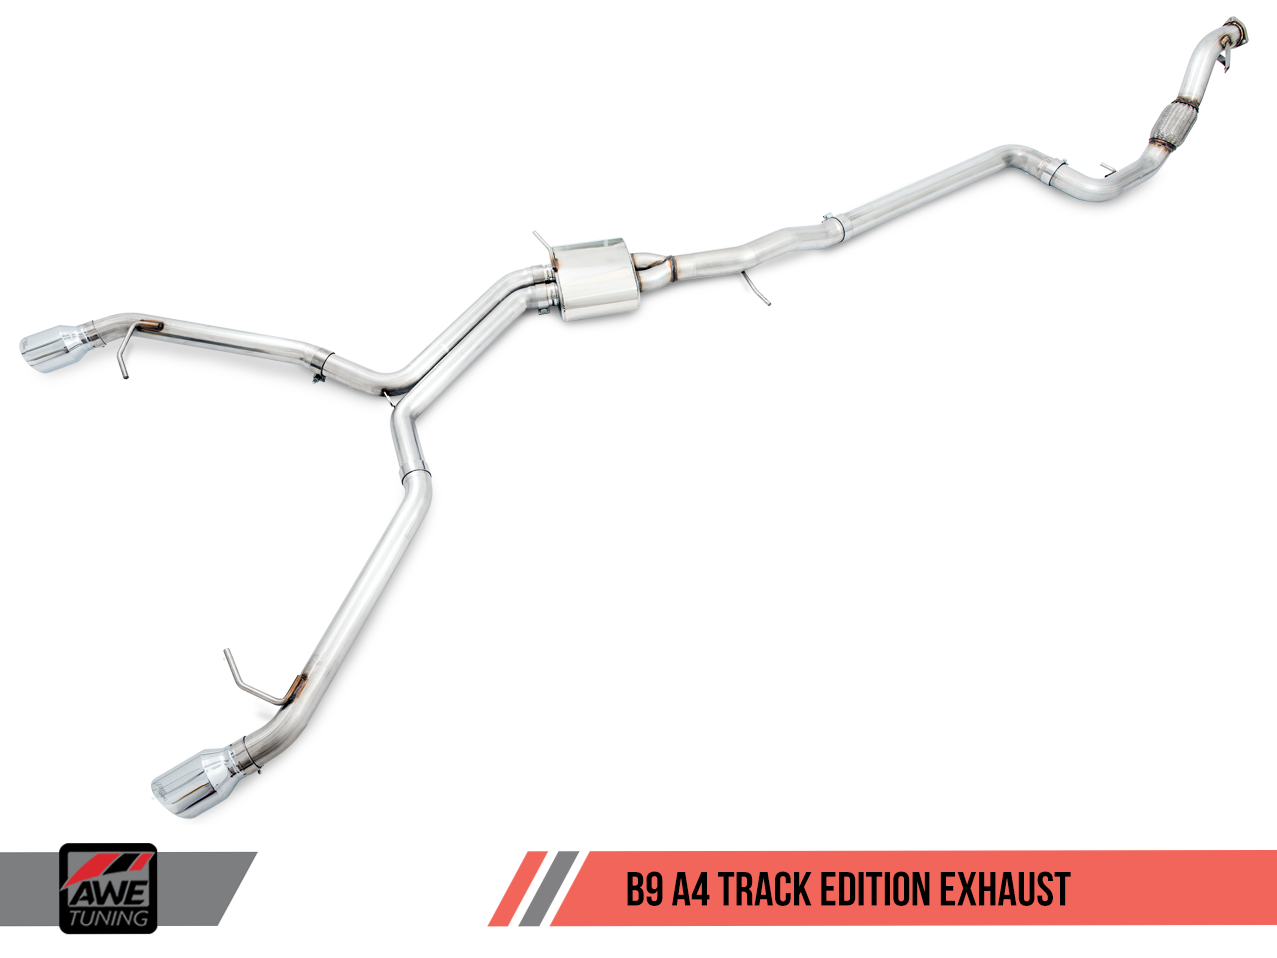 AWE Touring Edition Exhaust for B9 A4, Dual Outlet (includes DP) - Motorsports LA